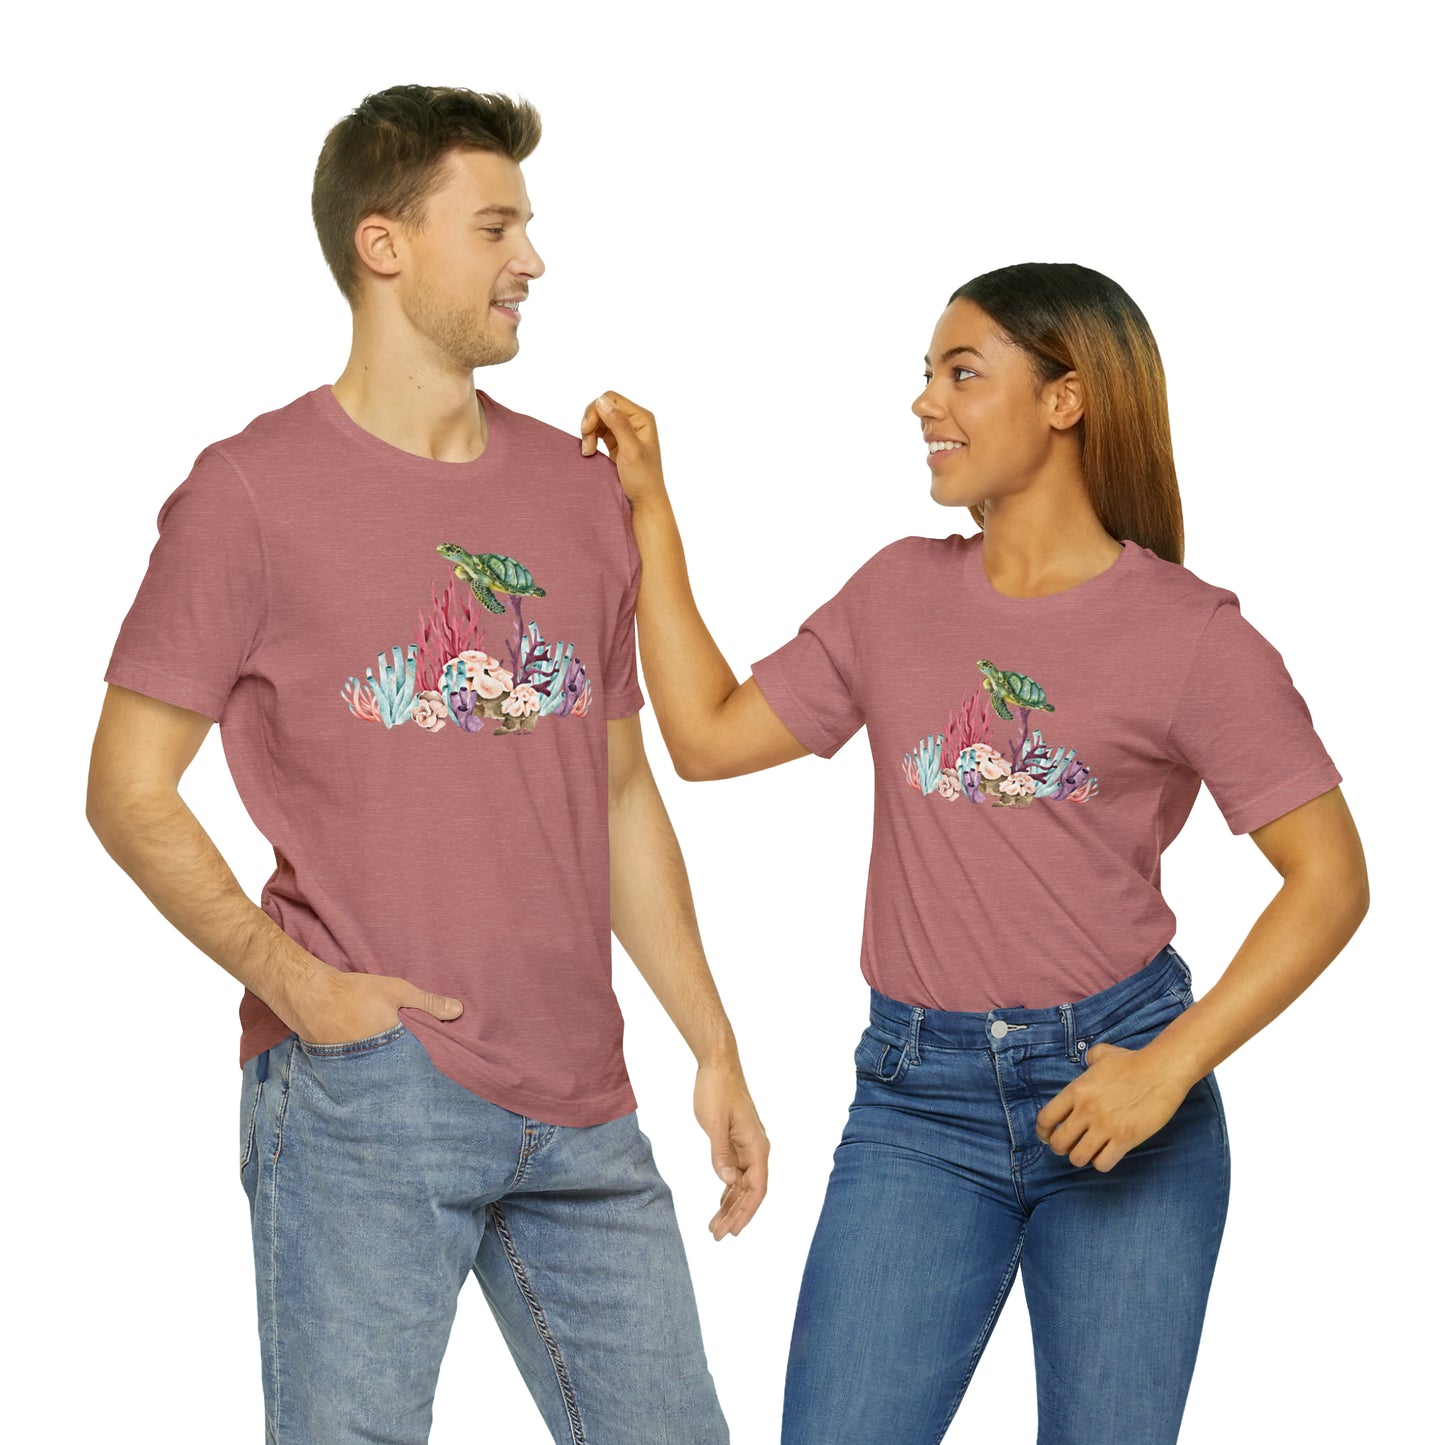 Mock up of a man and a woman wearing the mauve shirt